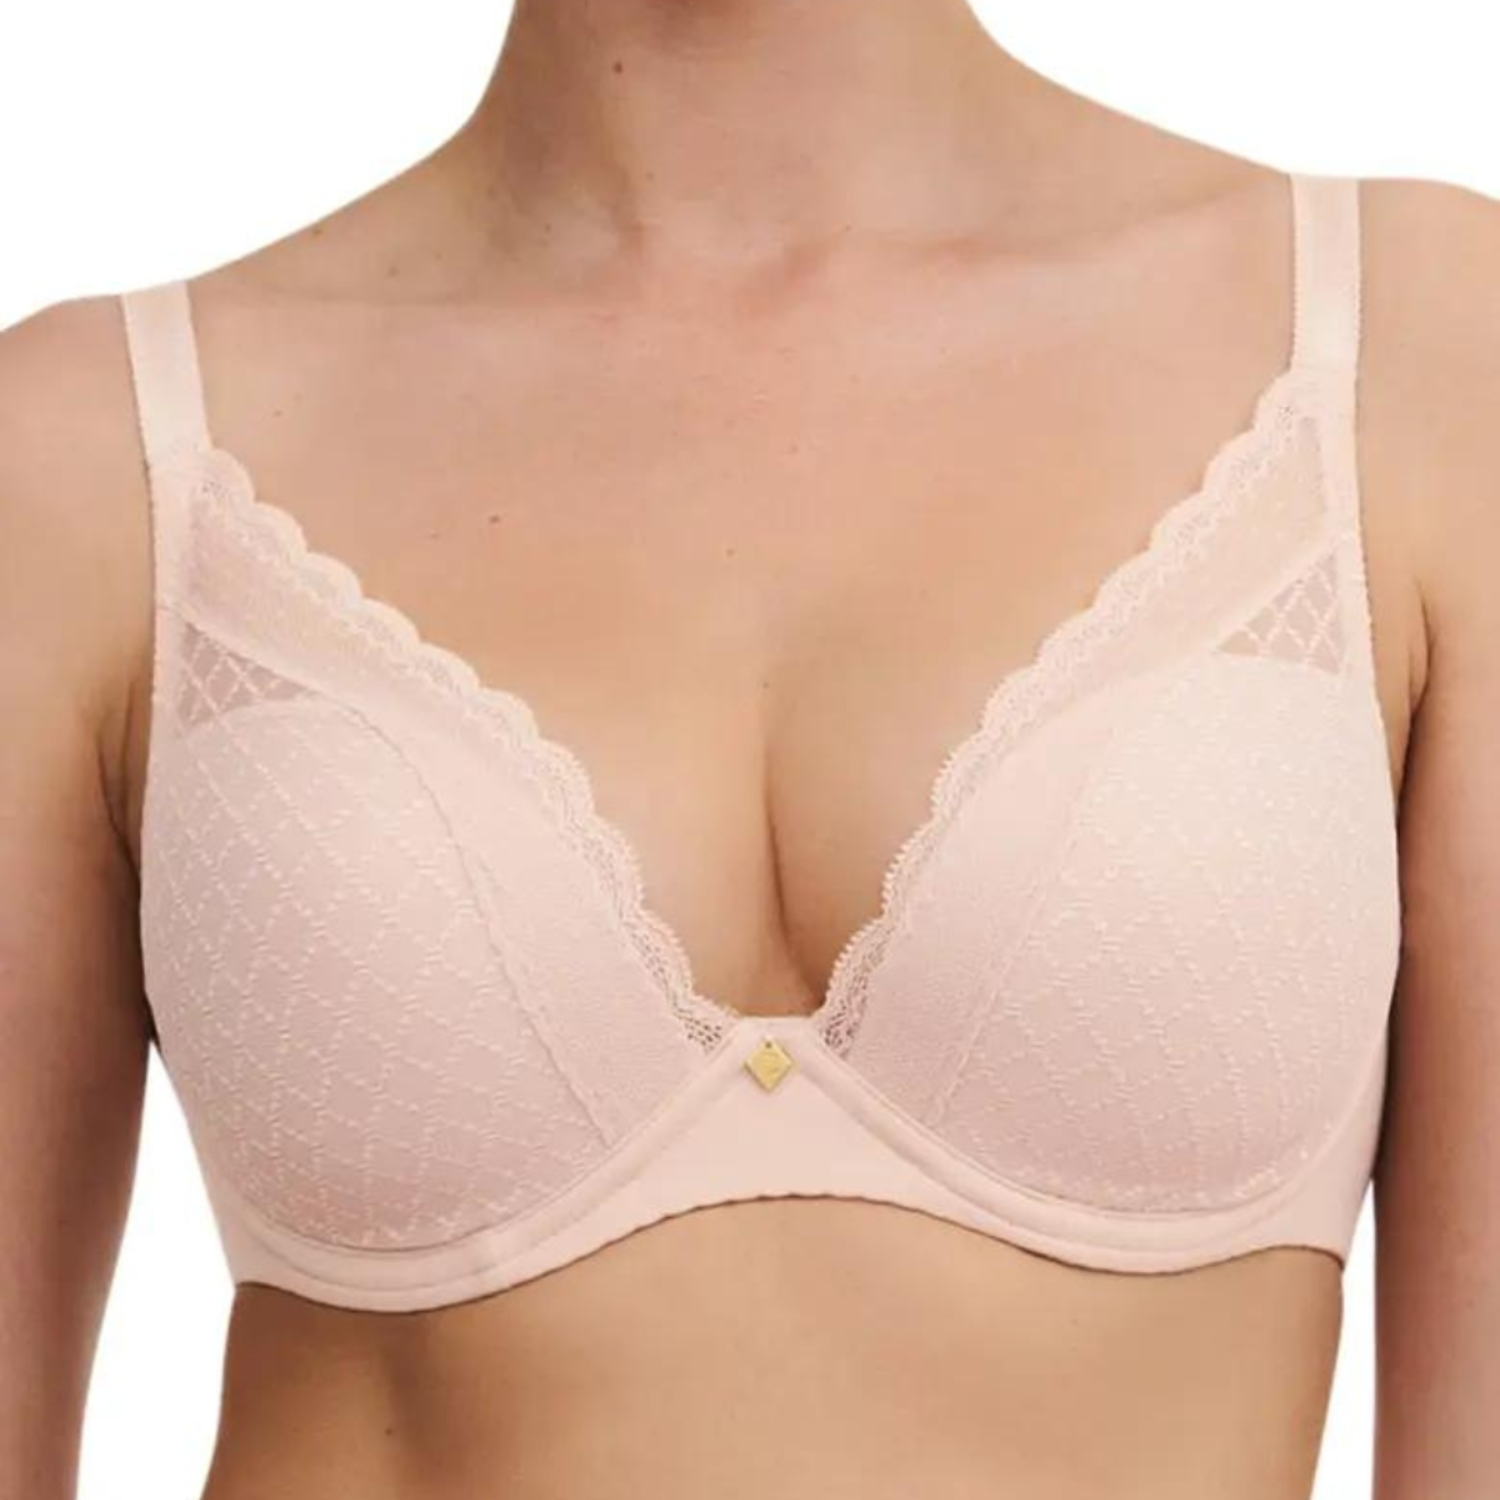 Buy  Brand - Nora Nico, Women's 6.6 Collection-Activewear Premium  Natural Beauty Seamless/Super Soft/Non Wired/Super Soft/T- Shirt Bra,Size:38C  - Dark Assorted (Pack of 3) at